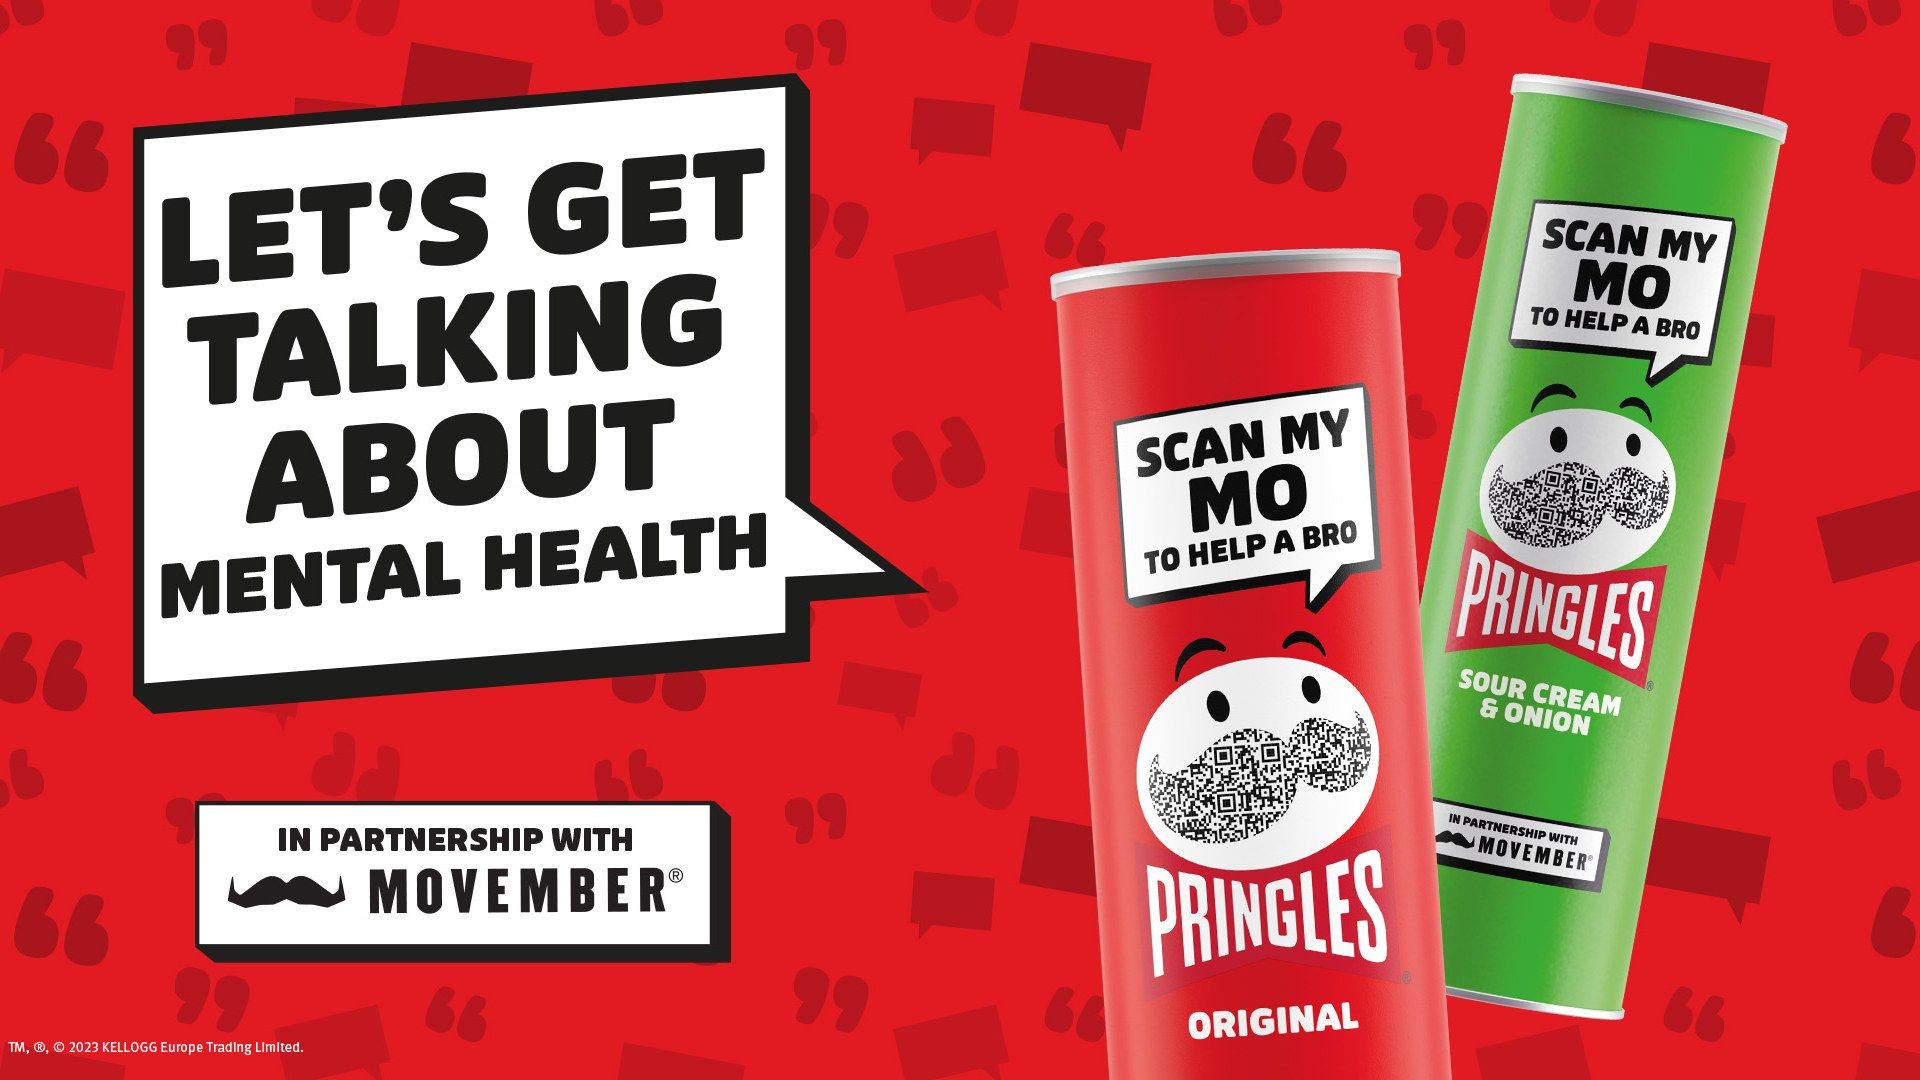 2 cans of Pringles with Mr P's moustache as a QR code